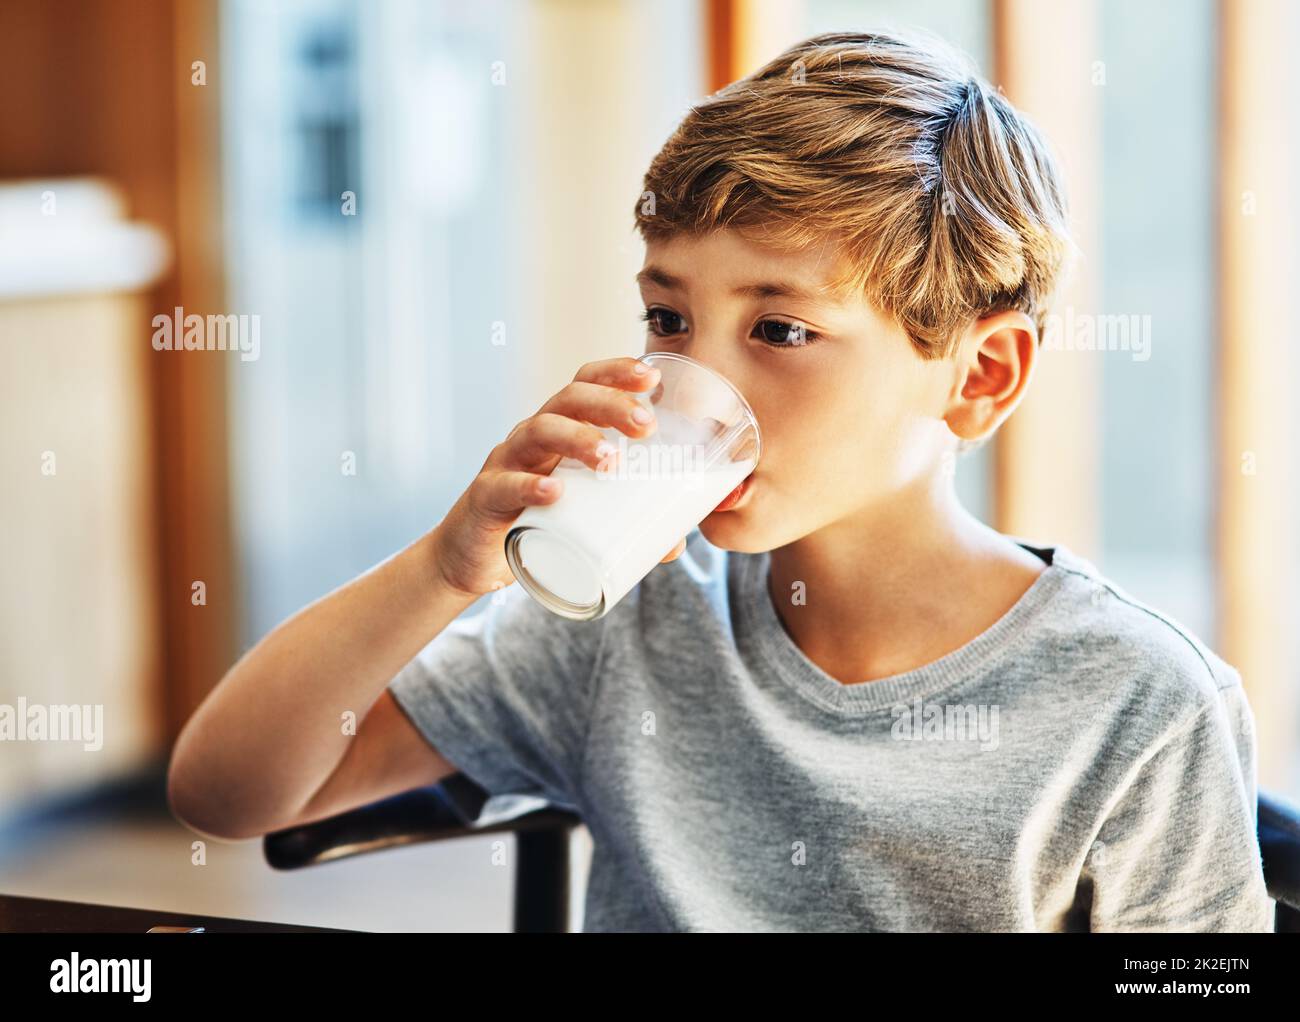 Getting his daily dose of calcium. Shot of a young boy drinking a glass of milk at home. Stock Photo